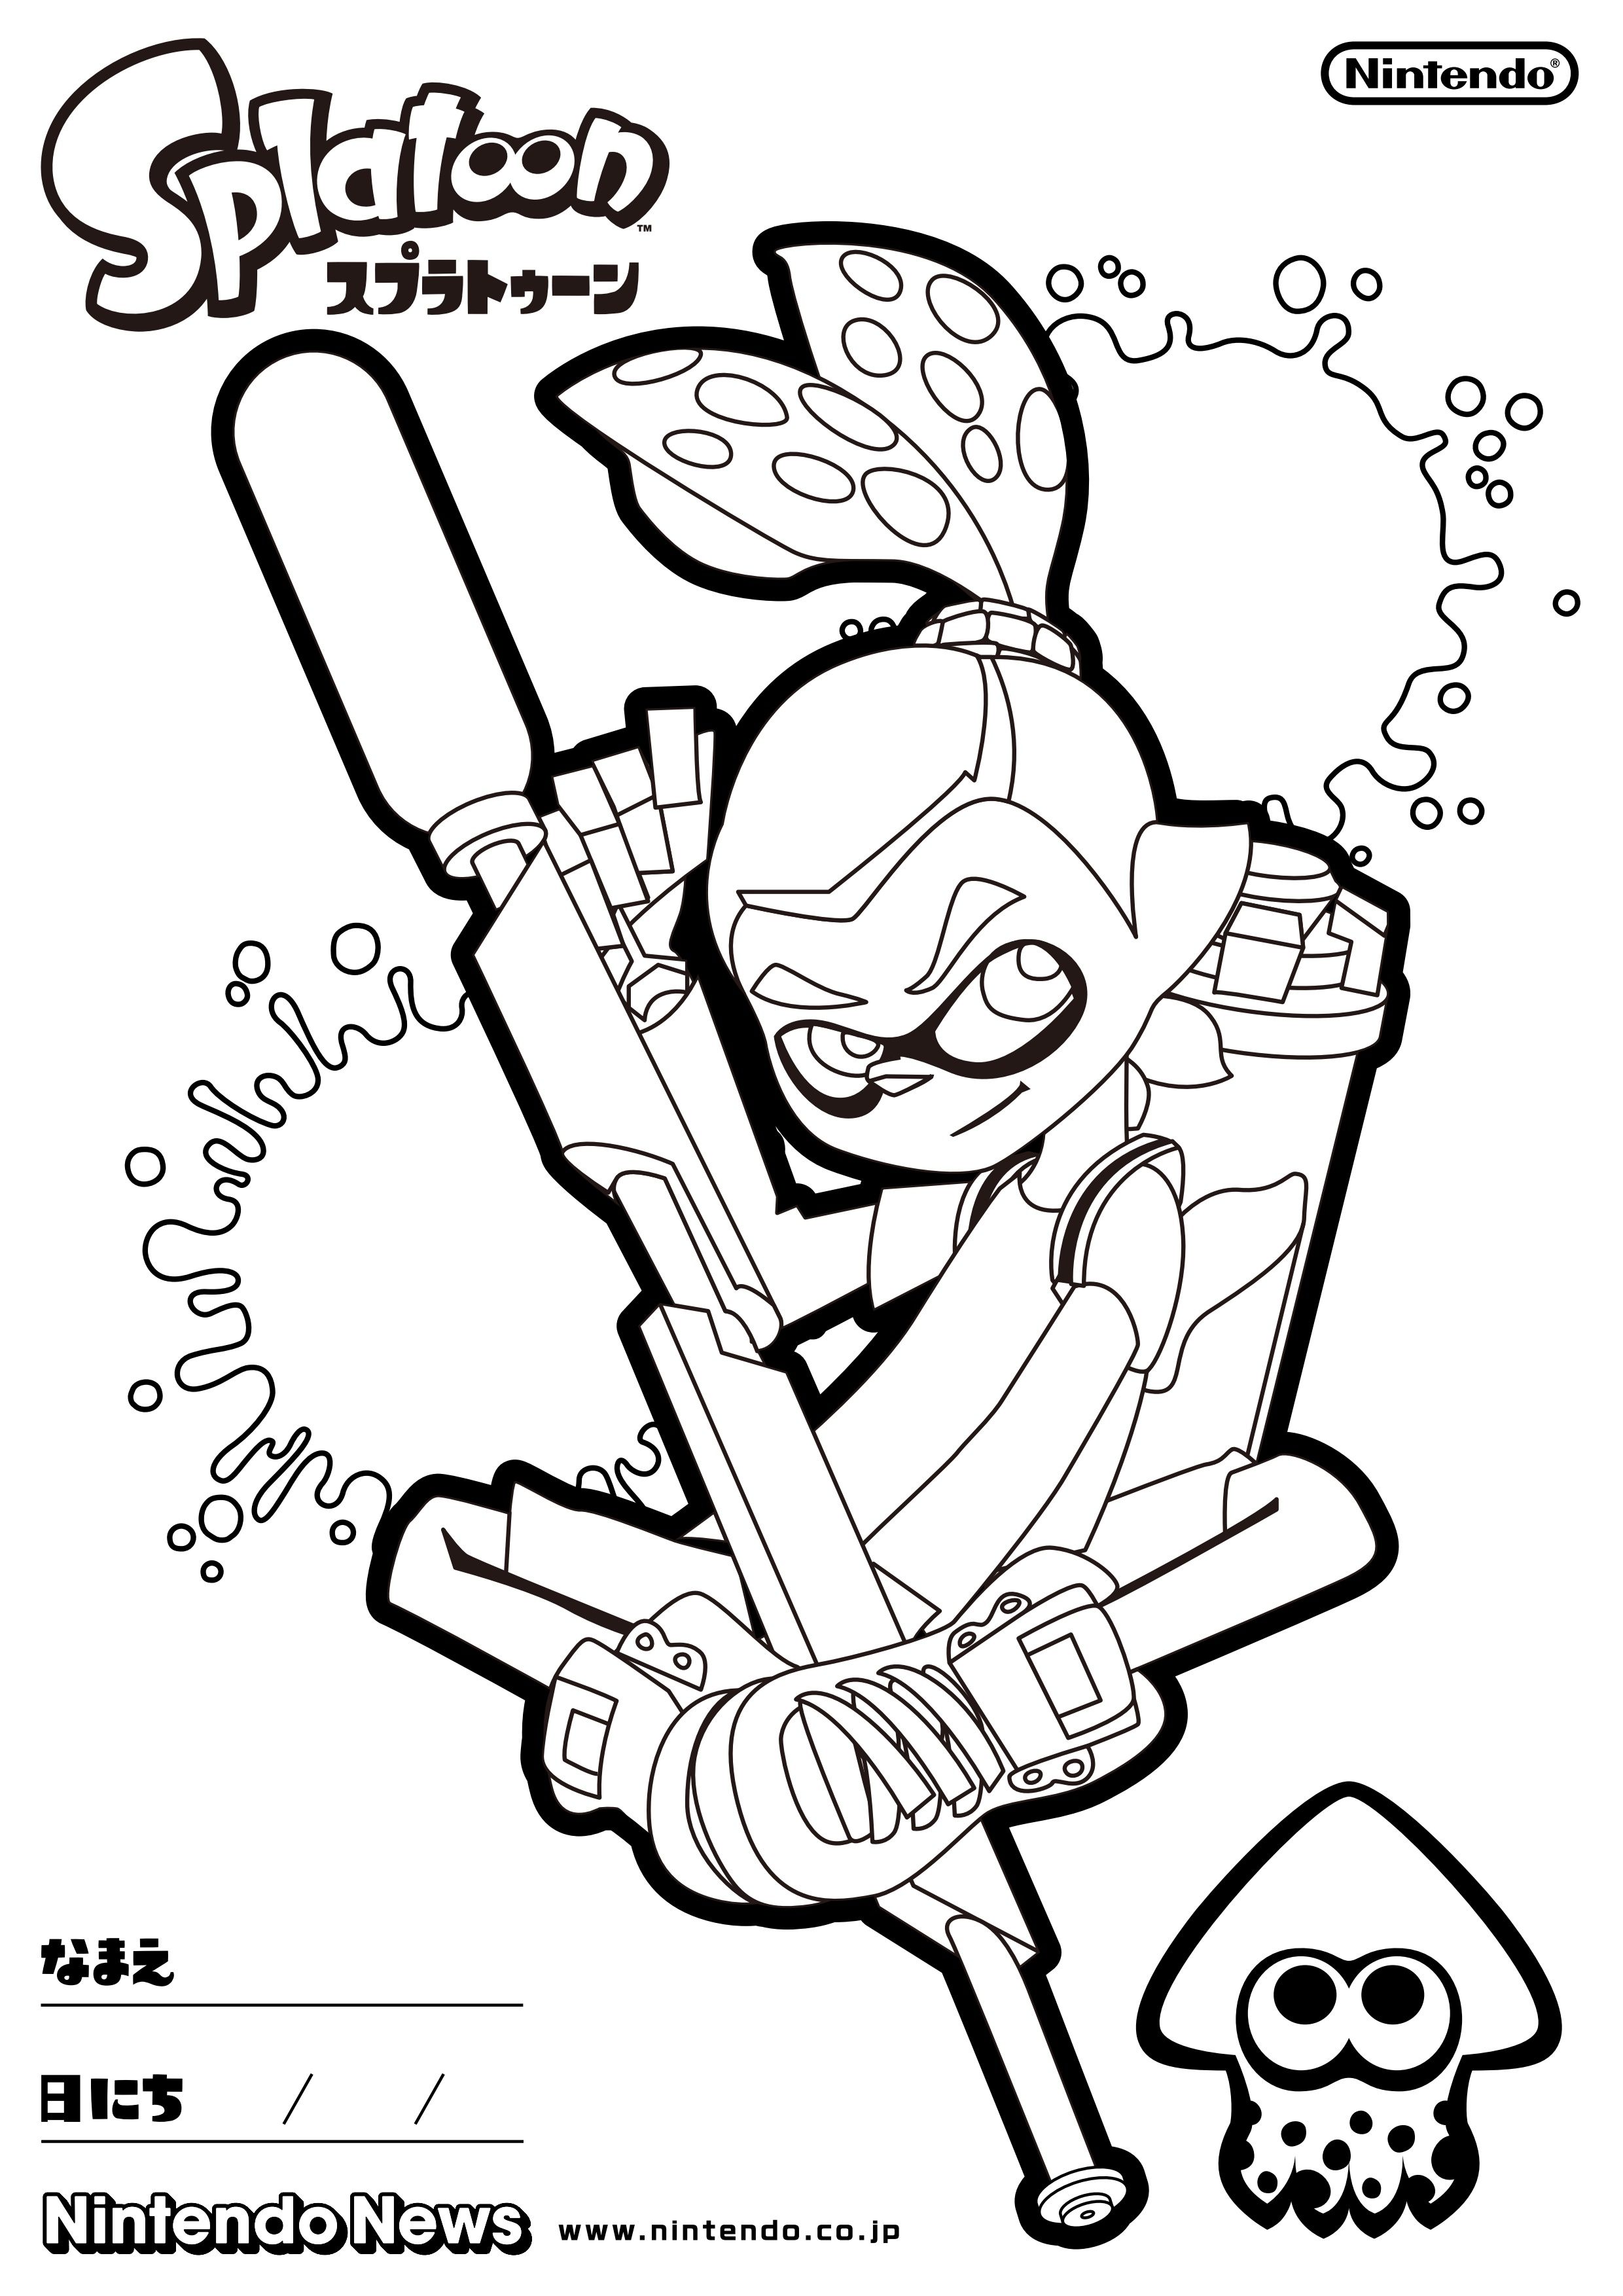 Free Coloring Pages Of Splatoon Sketch Coloring Page | Coloring ...